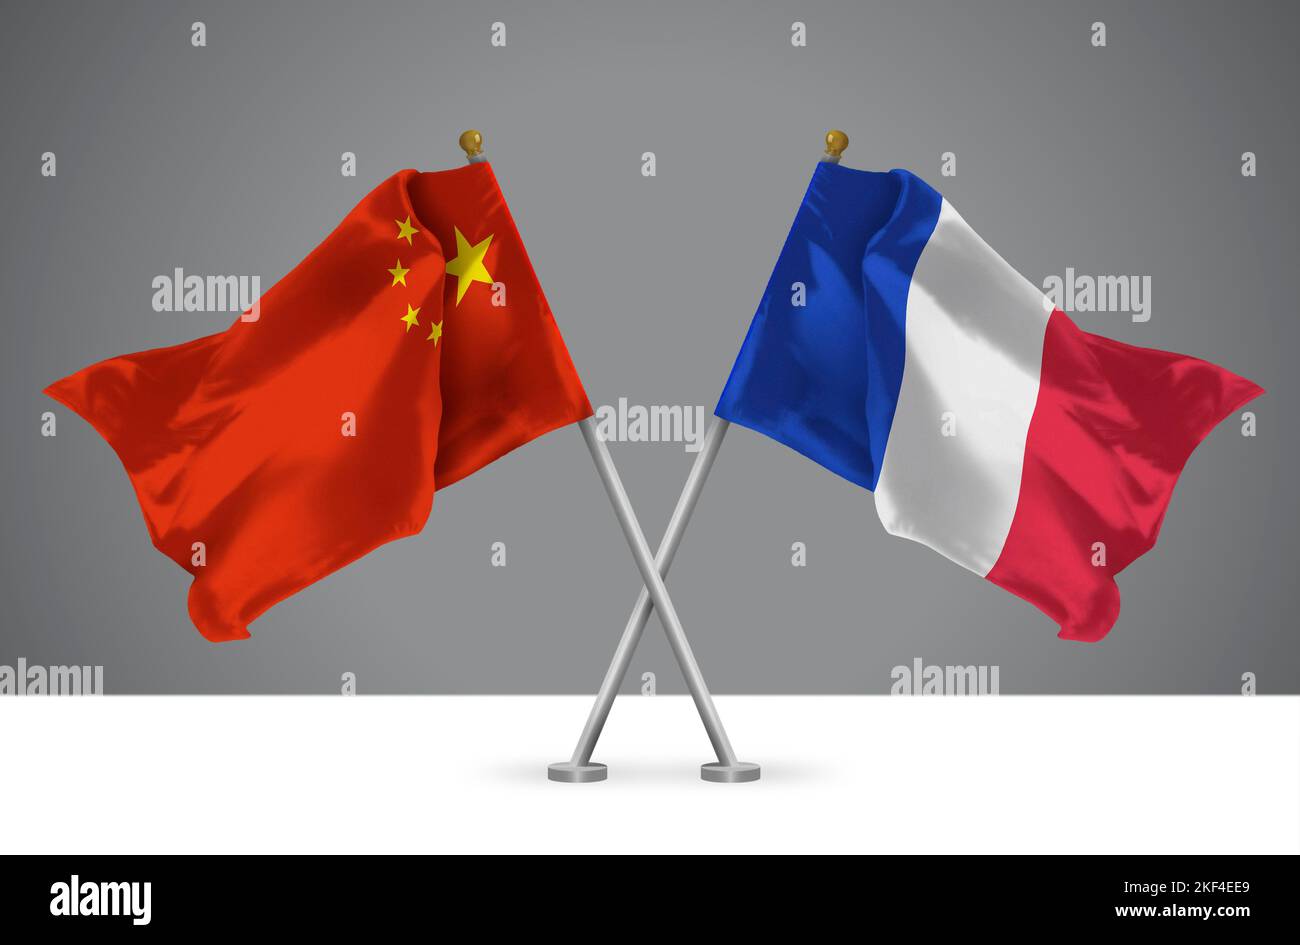 Two Wavy Crossed Flags of China and France, Sign of Chinese and French Relationships Stock Photo